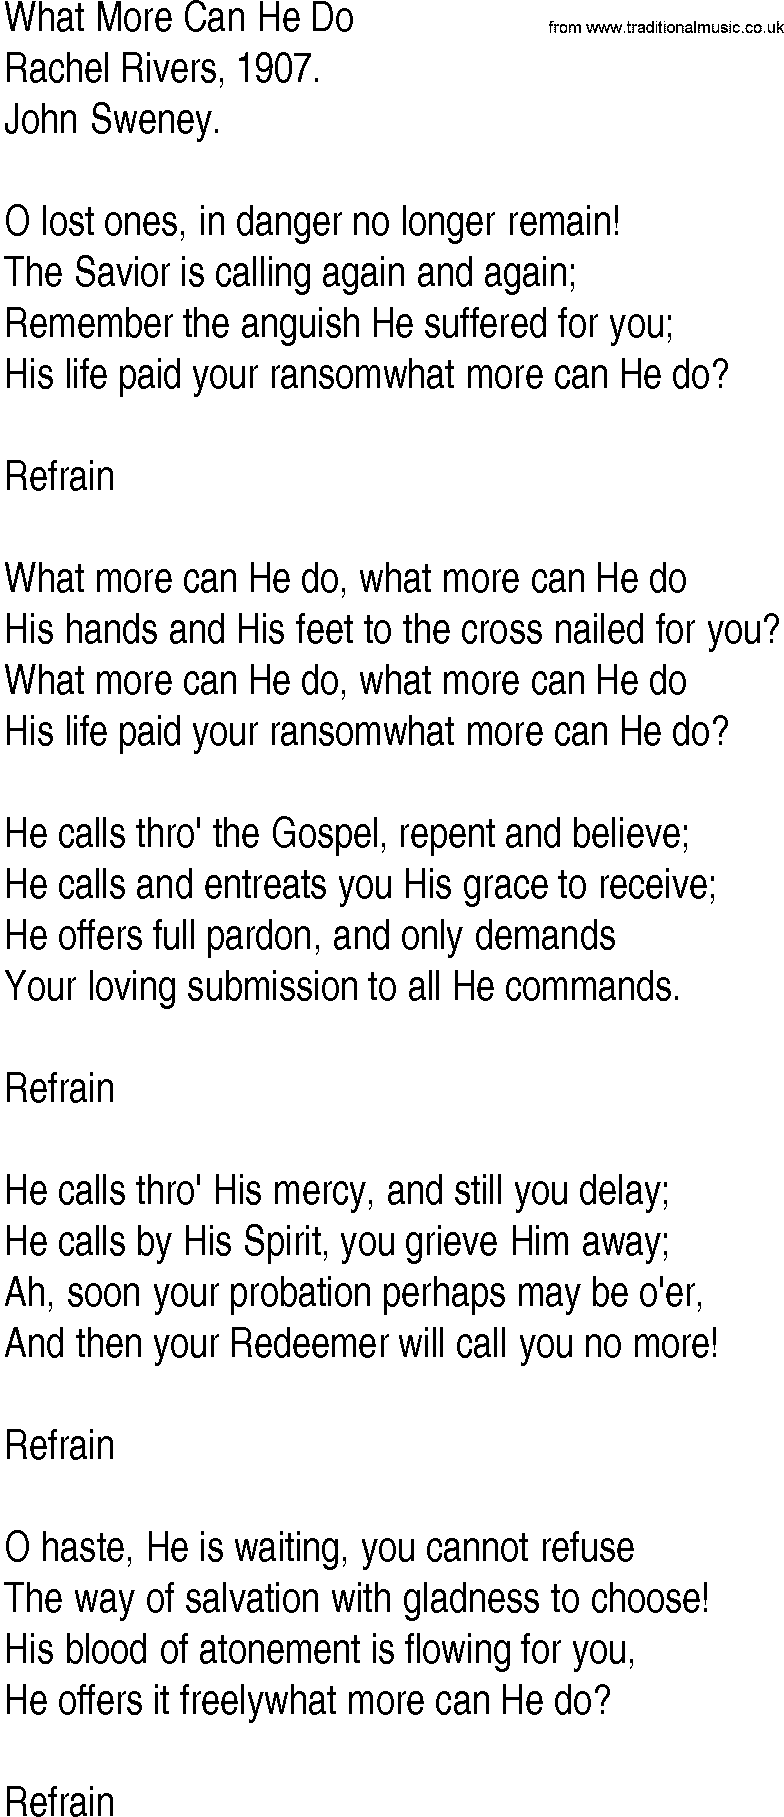 Hymn and Gospel Song: What More Can He Do by Rachel Rivers lyrics